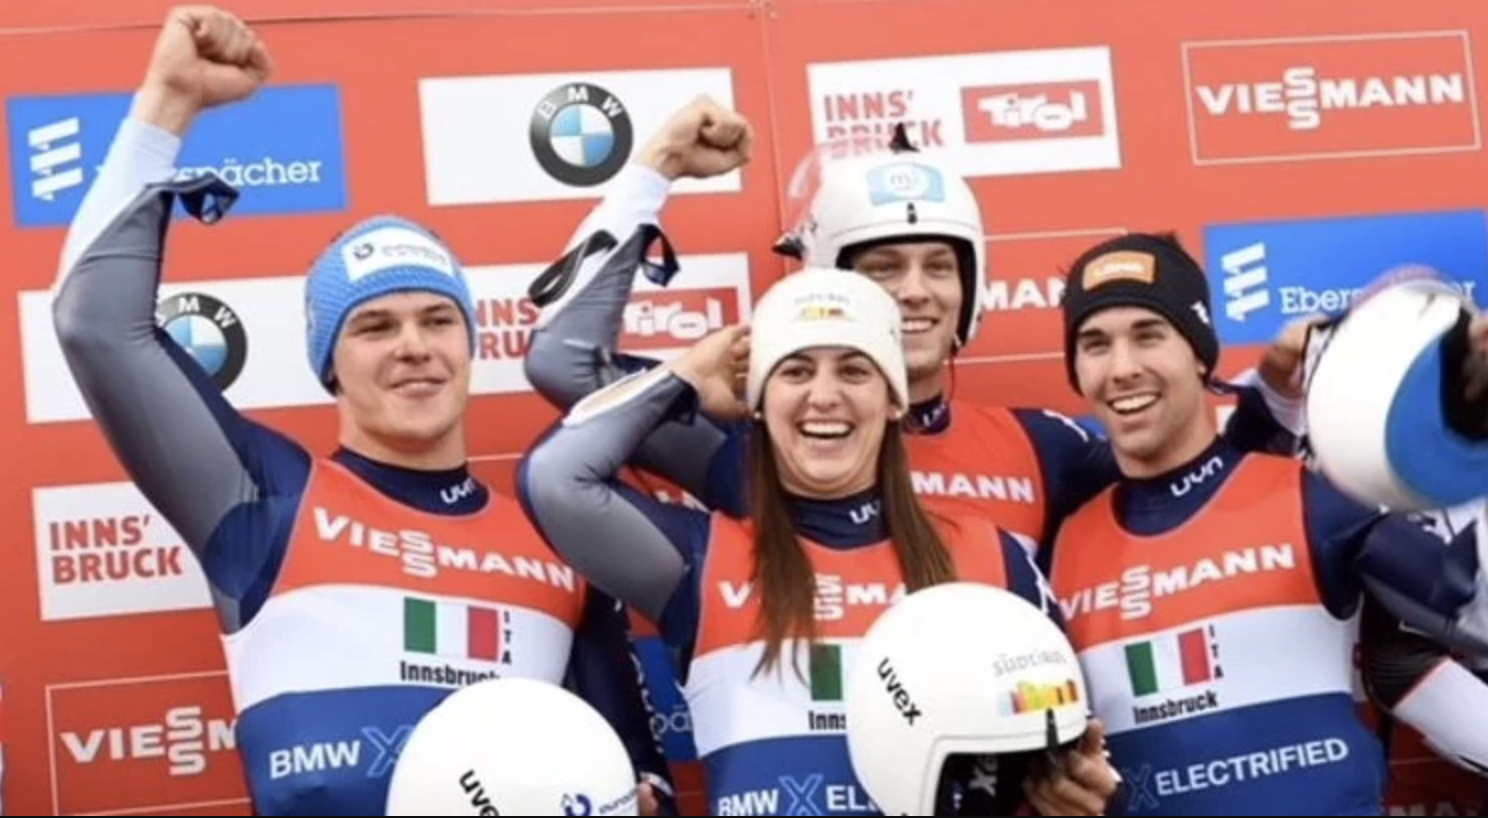 images/1Primo_Piano_2020/team-relay-igls.png